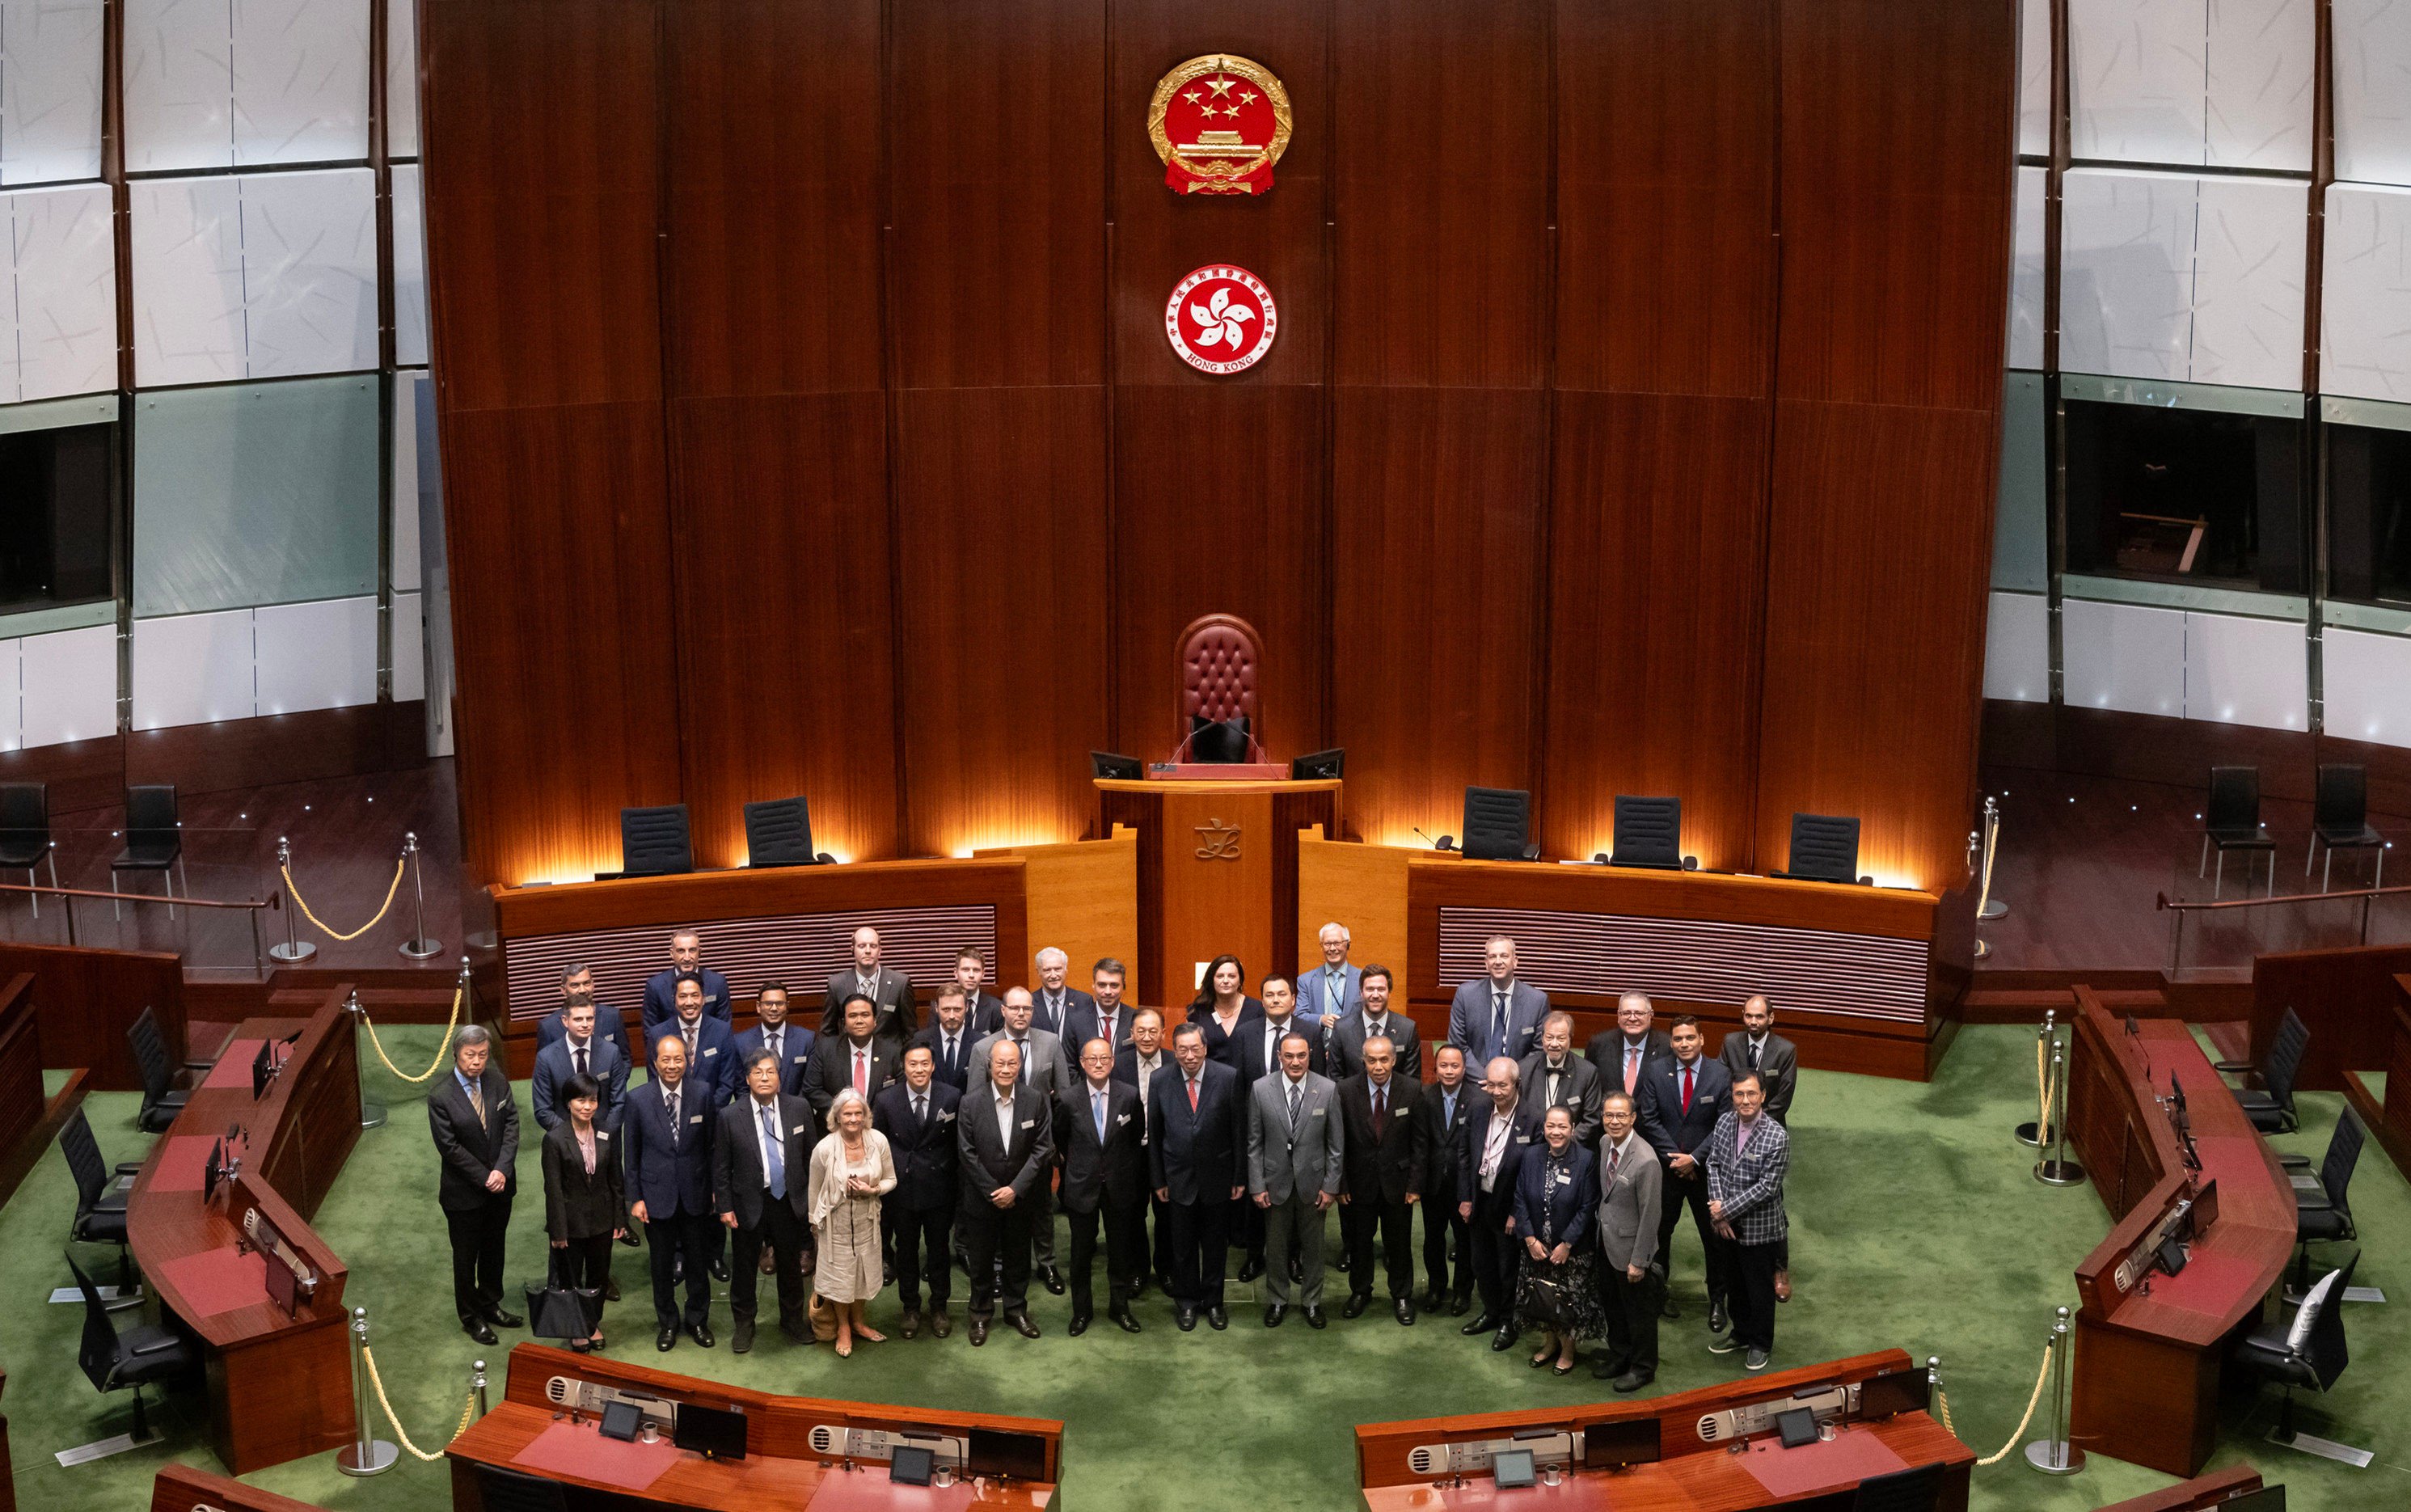 Legco president Andrew Leung (front row, centre) joins foreign diplomats for a group photo in the chamber. Photo: Legco